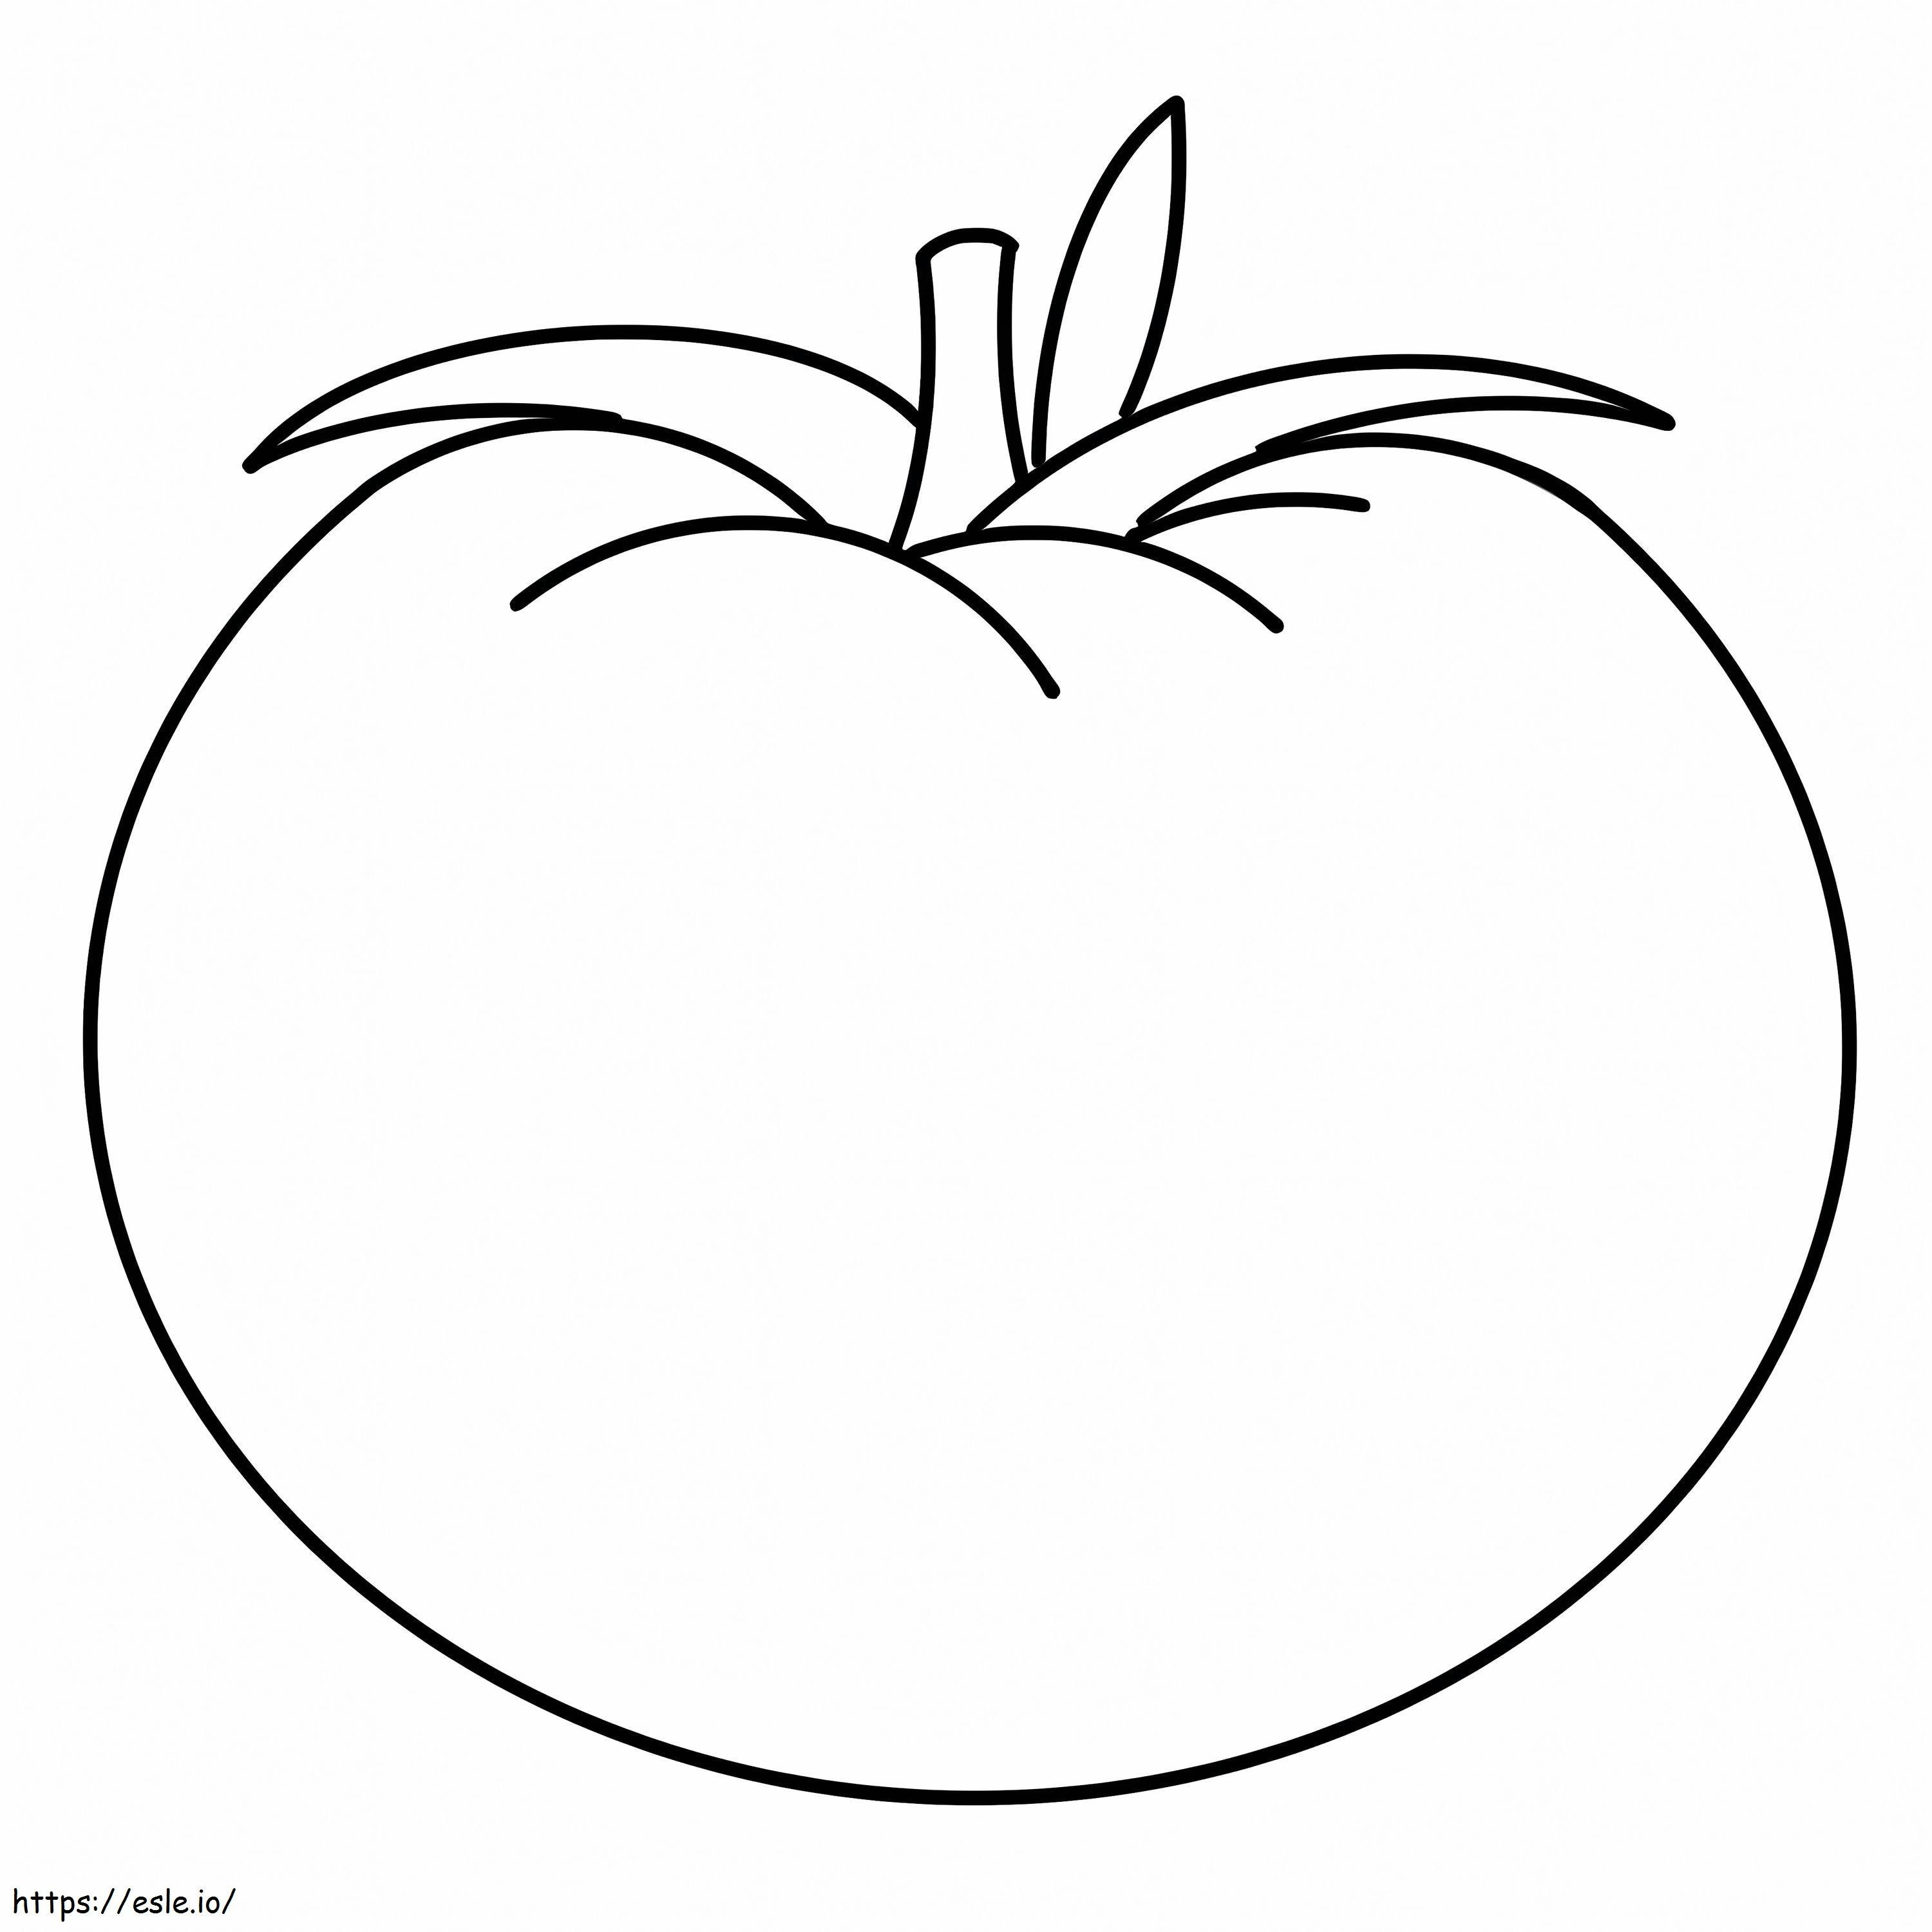 Basic Tomato coloring page